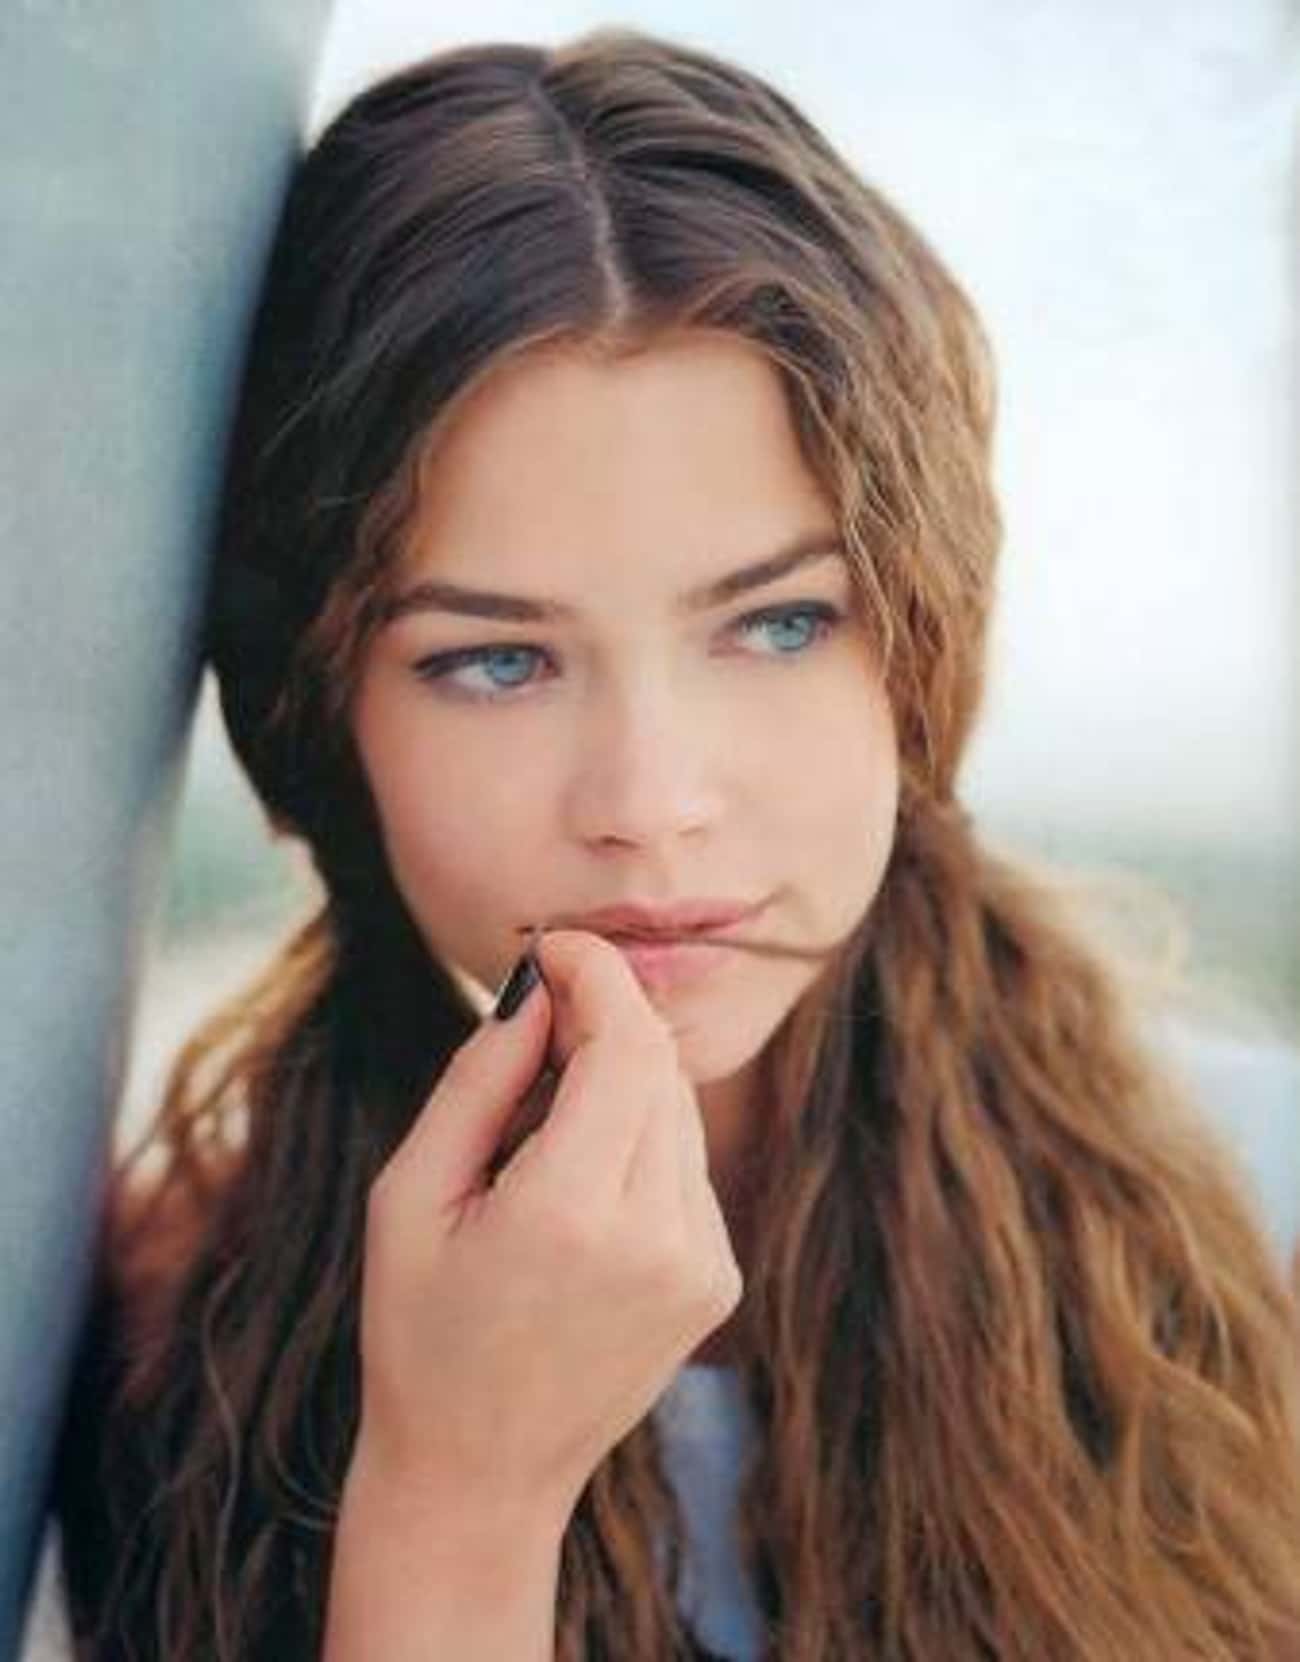 Young Denise Richards as a Teenager